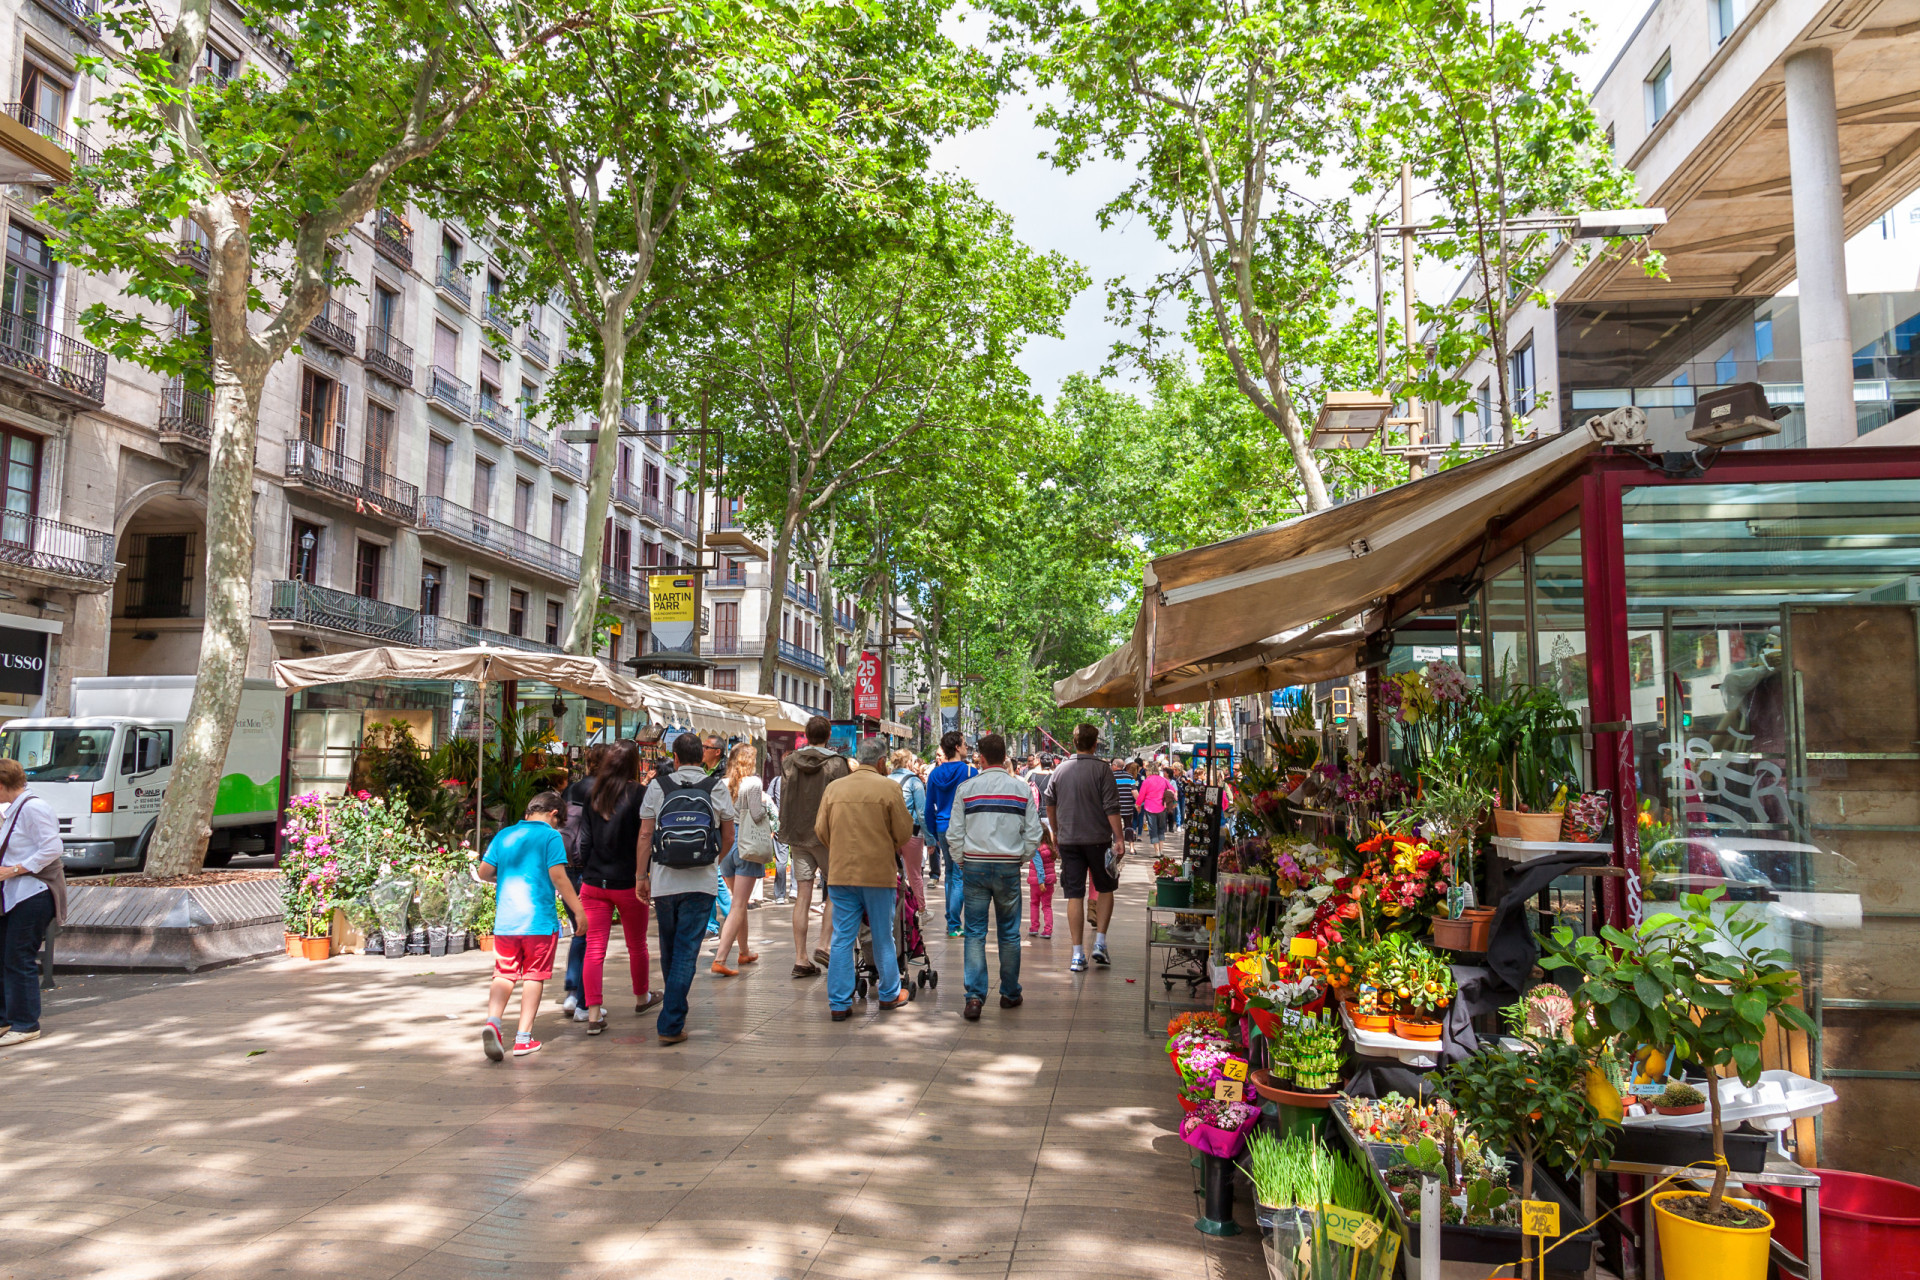 <p><span>Barcelona is notorious for pickpocketing, and Las Ramblas is infamous for its thefts, which often happen when victims </span><span>are watching</span><span> the street performers.</span></p><p>You may also like:<a href="https://www.starsinsider.com/n/334122?utm_source=msn.com&utm_medium=display&utm_campaign=referral_description&utm_content=717448en-us"> Bizarre medical facts you won’t believe are true</a></p>